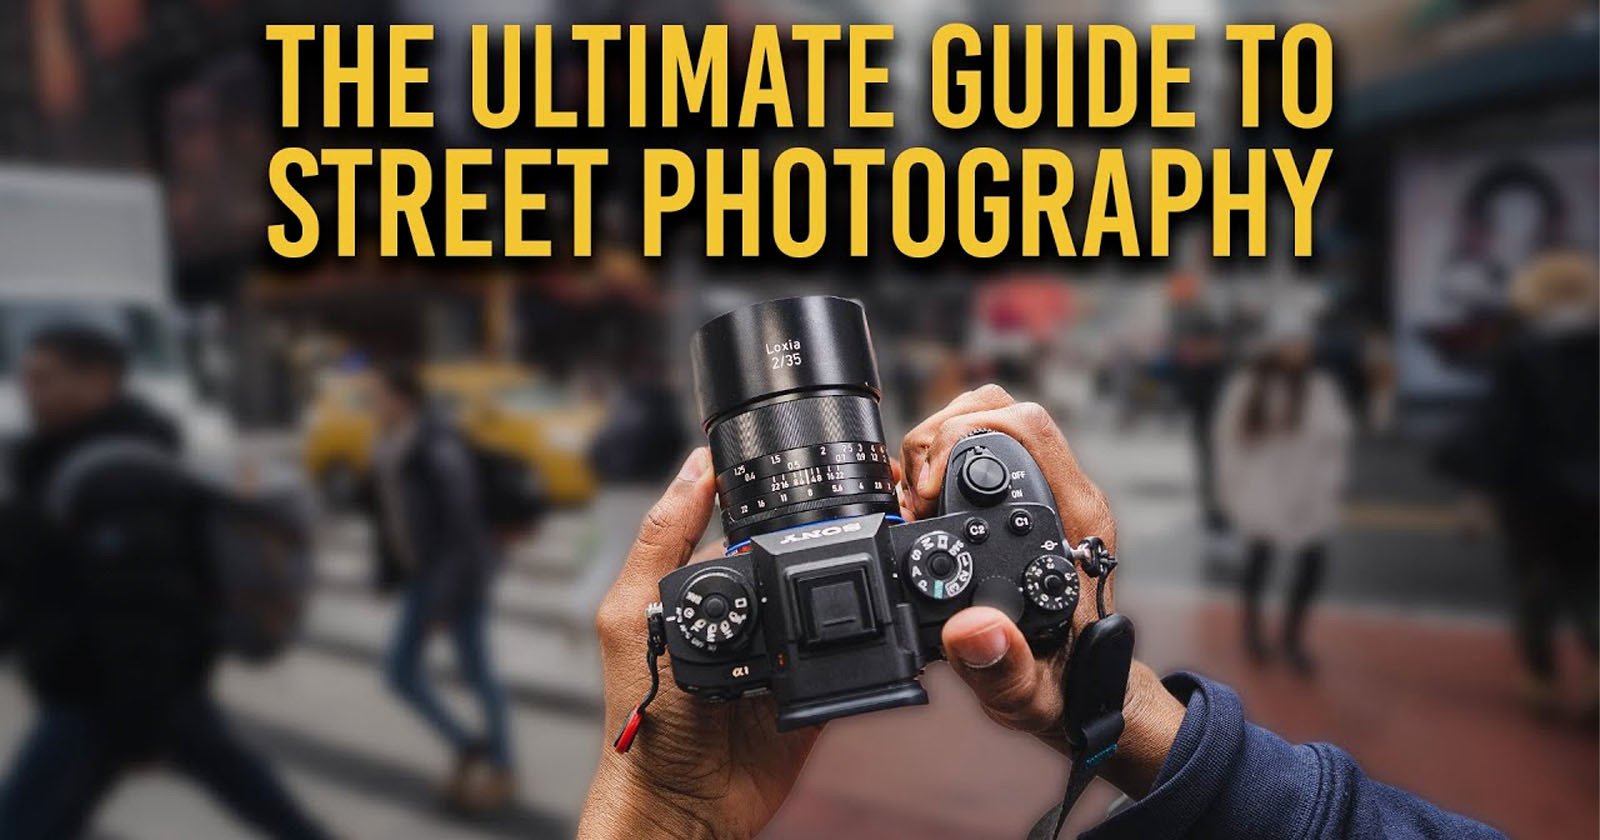 Want to Learn Street Photography? Heres a Free Hour-Long Video Course